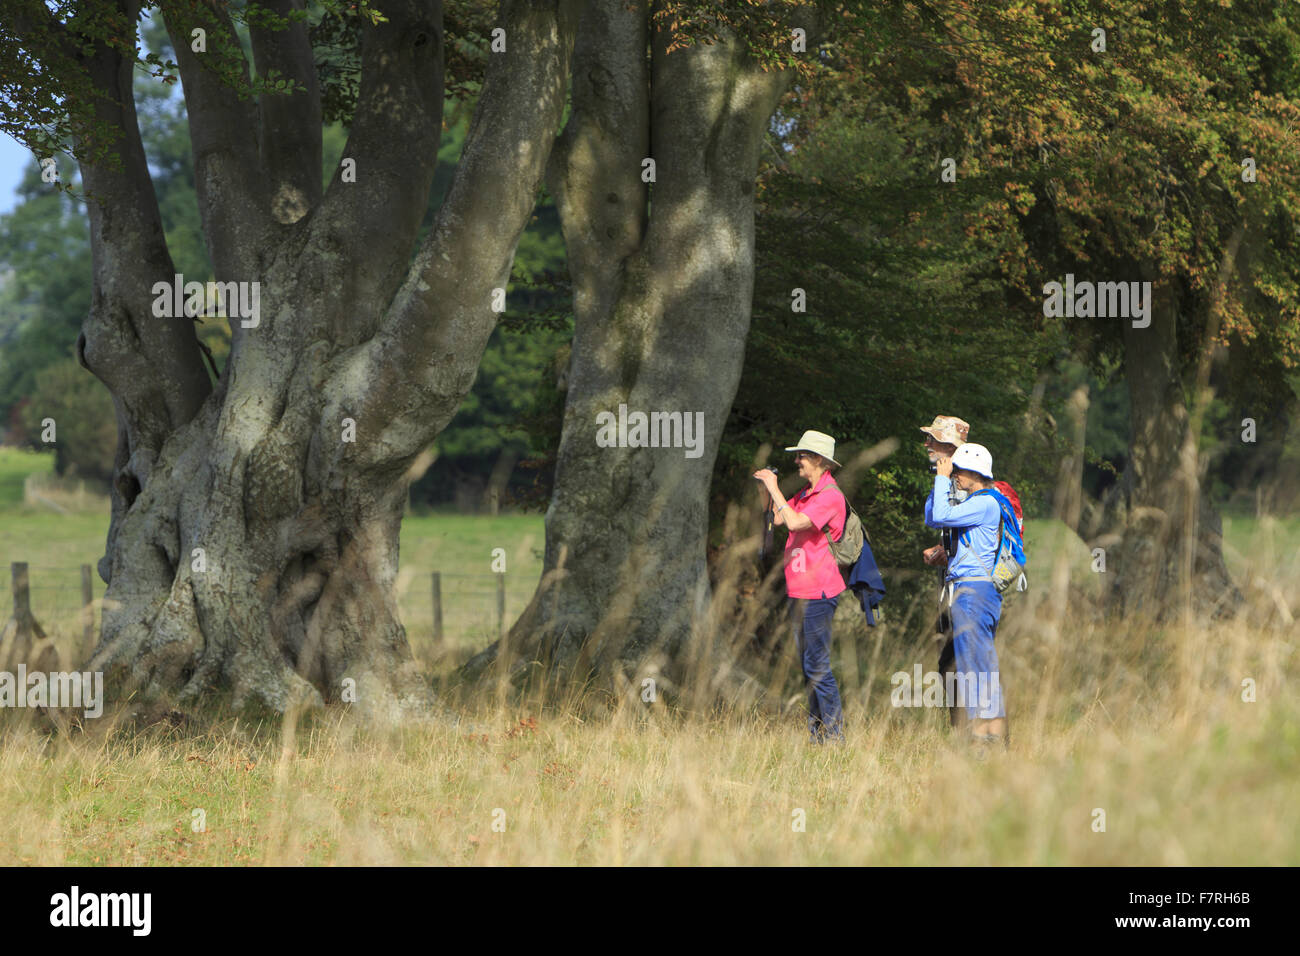 Visitors in the Stonehenge Landscape, Wiltshire. The landscape is studded with ancient monuments. Stock Photo